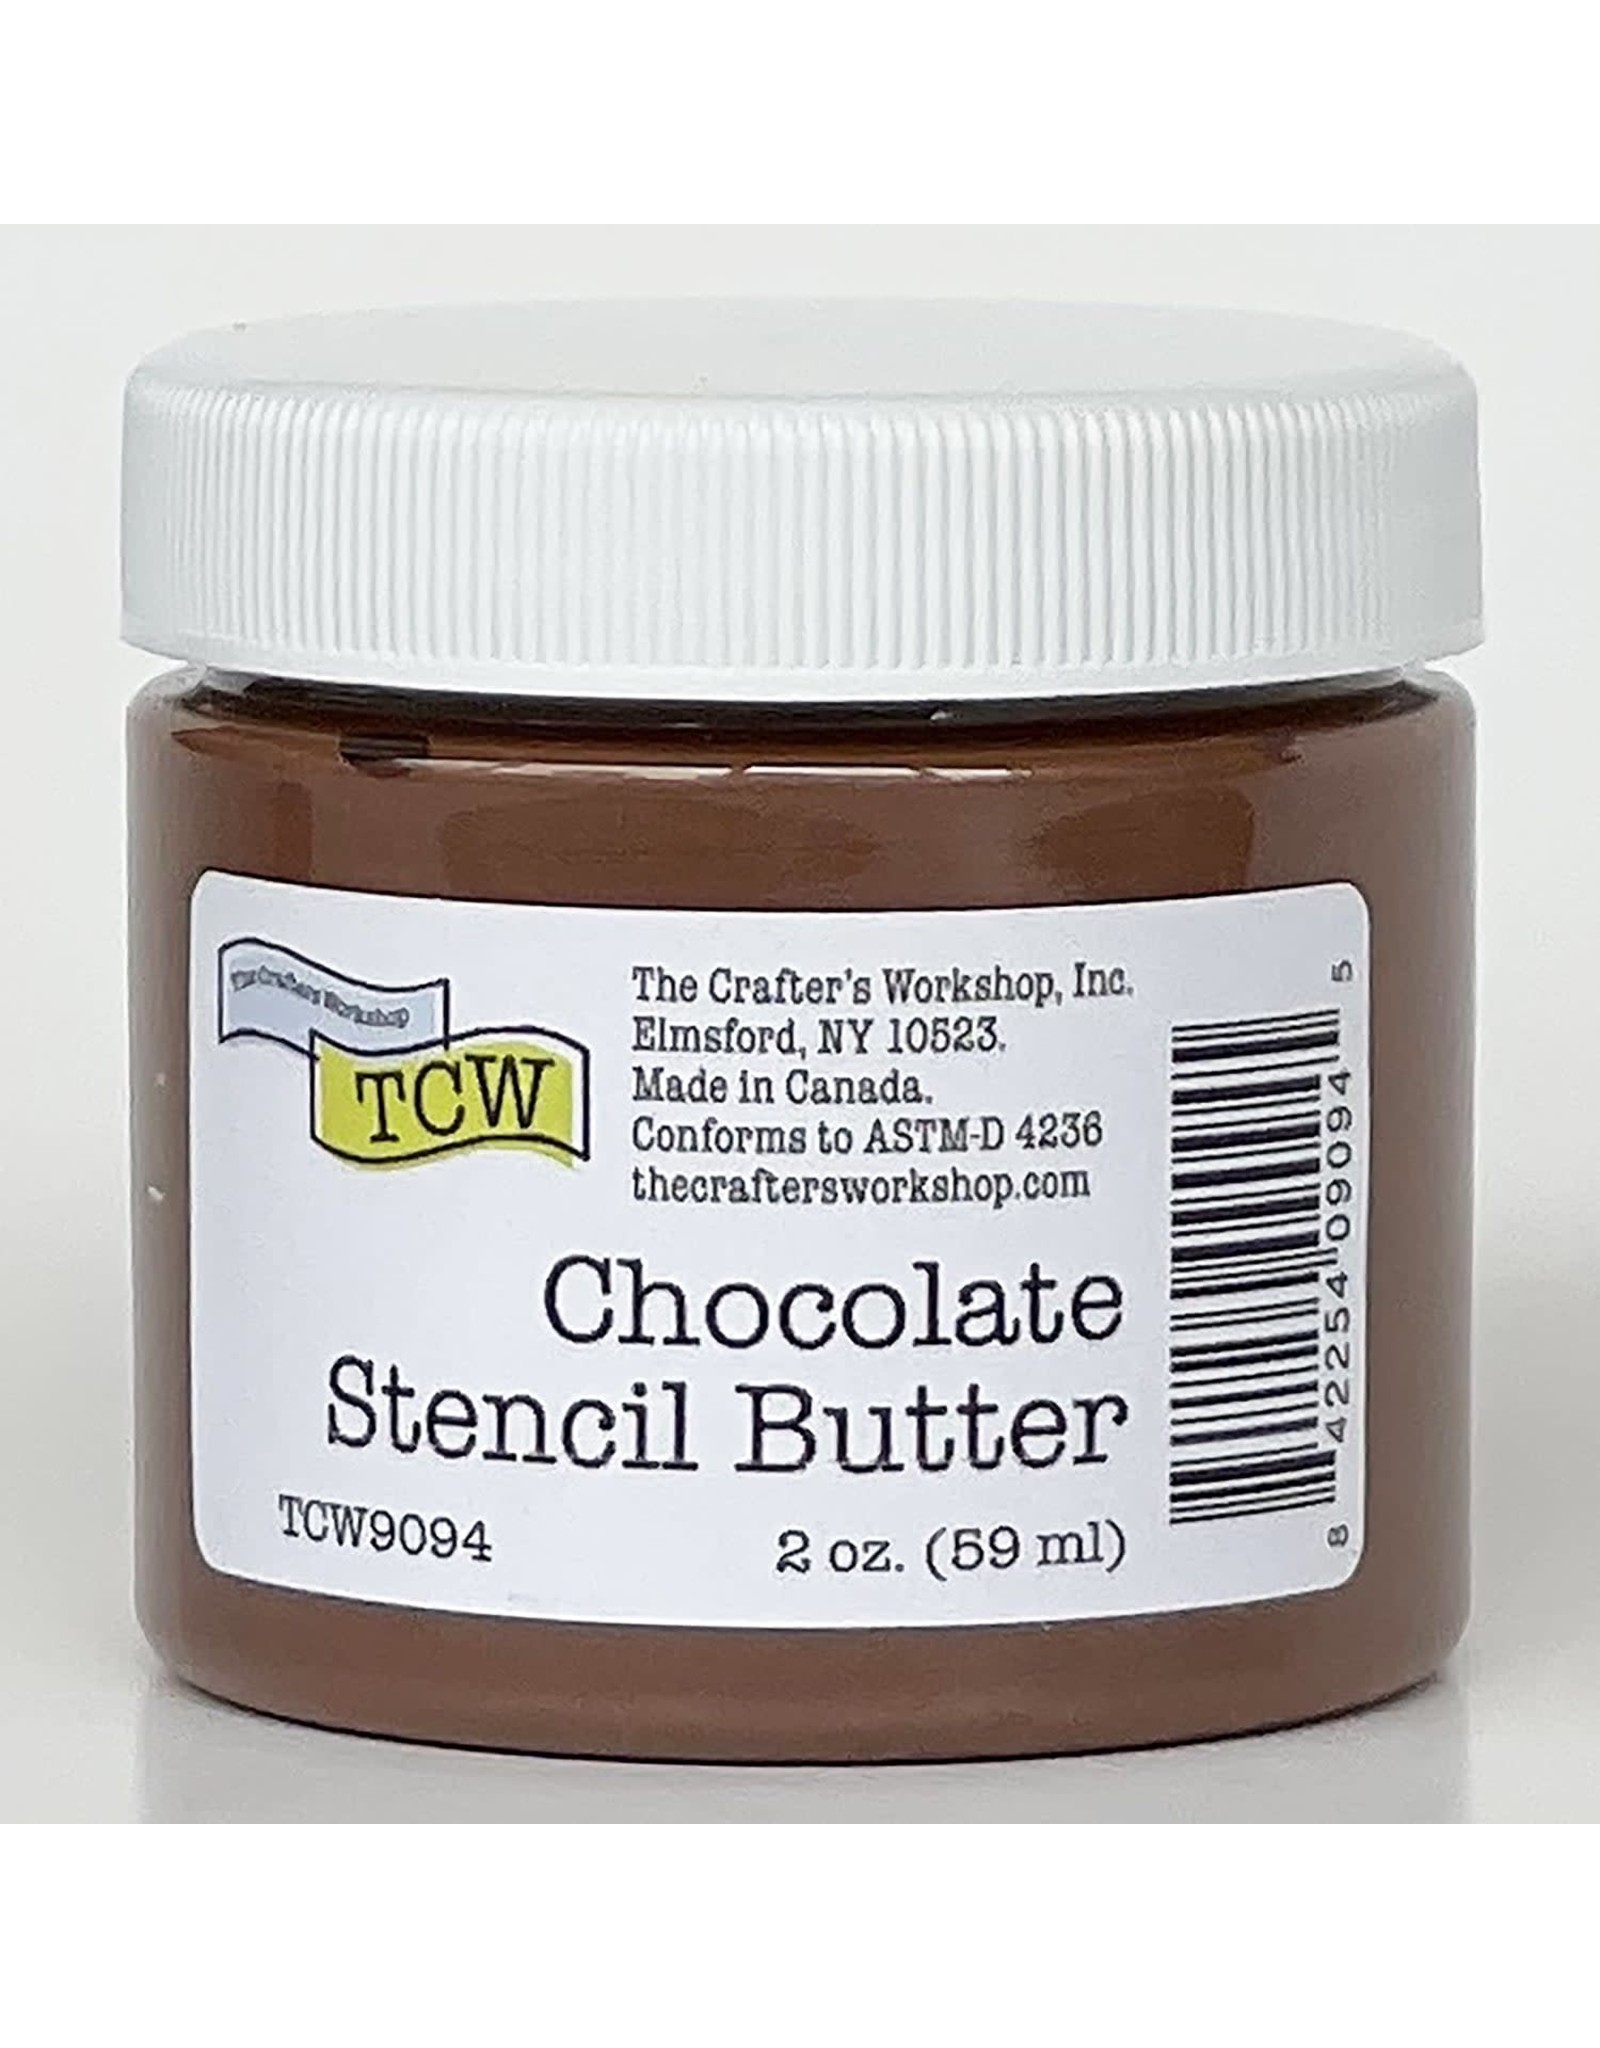 CRAFTERS WORKSHOP THE CRAFTERS WORKSHOP CHOCOLATE STENCIL BUTTER 2oz